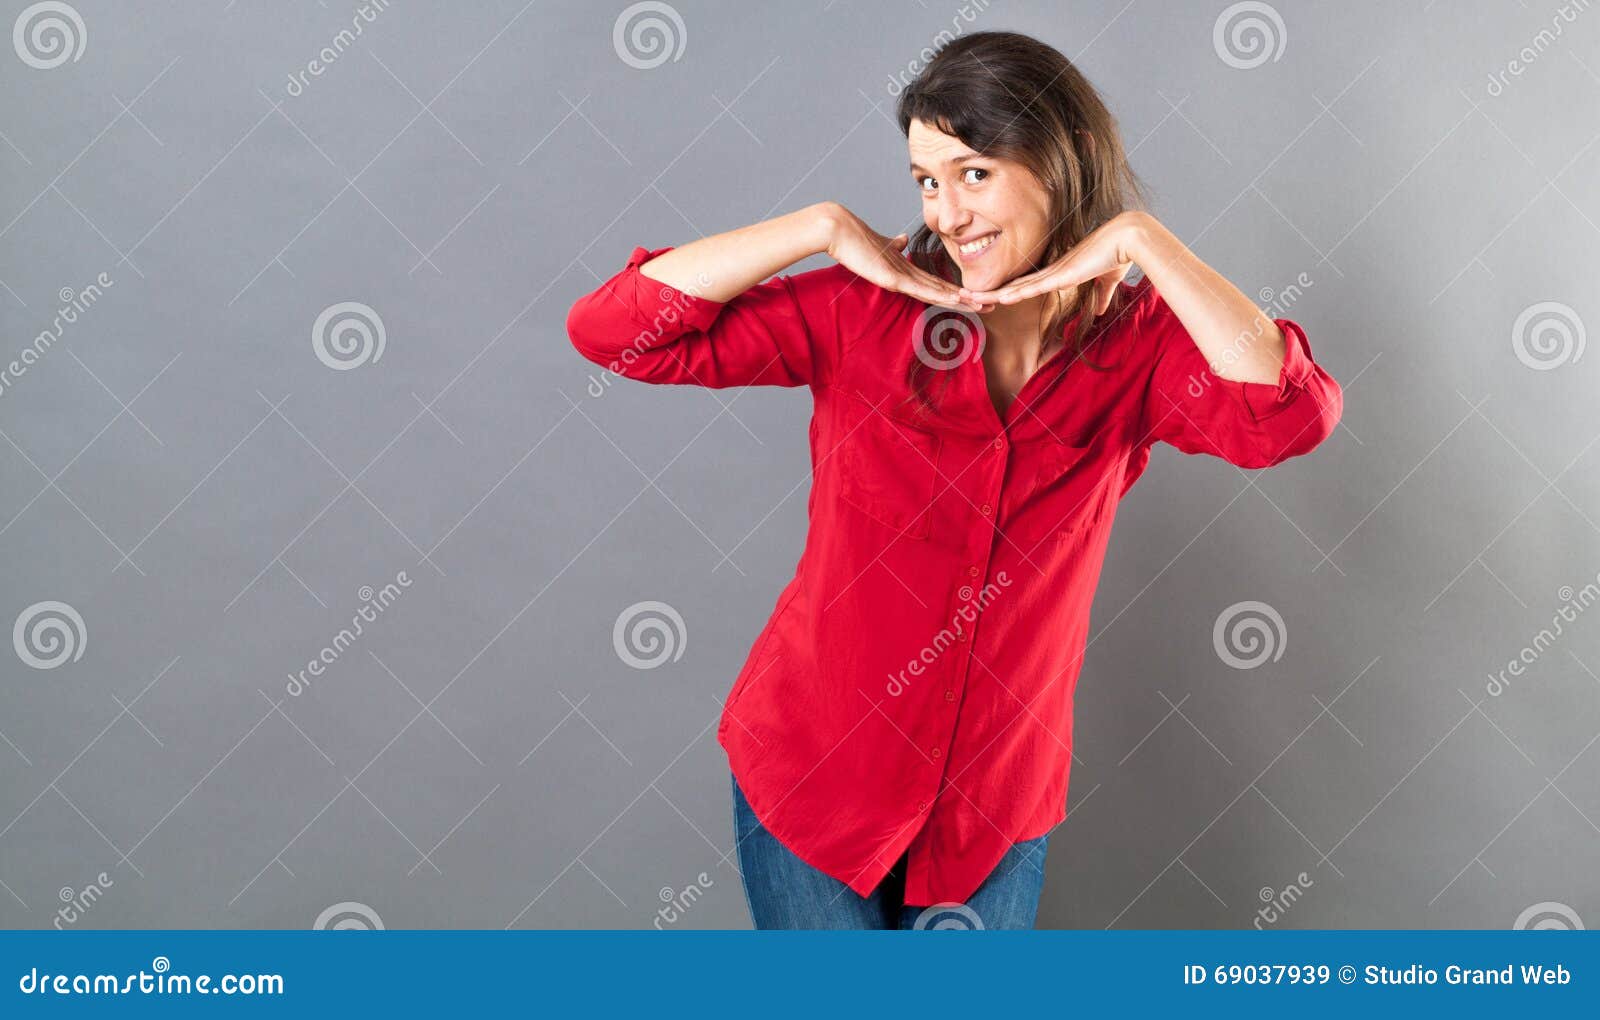 playful woman posing with fun hand gesture for seduction